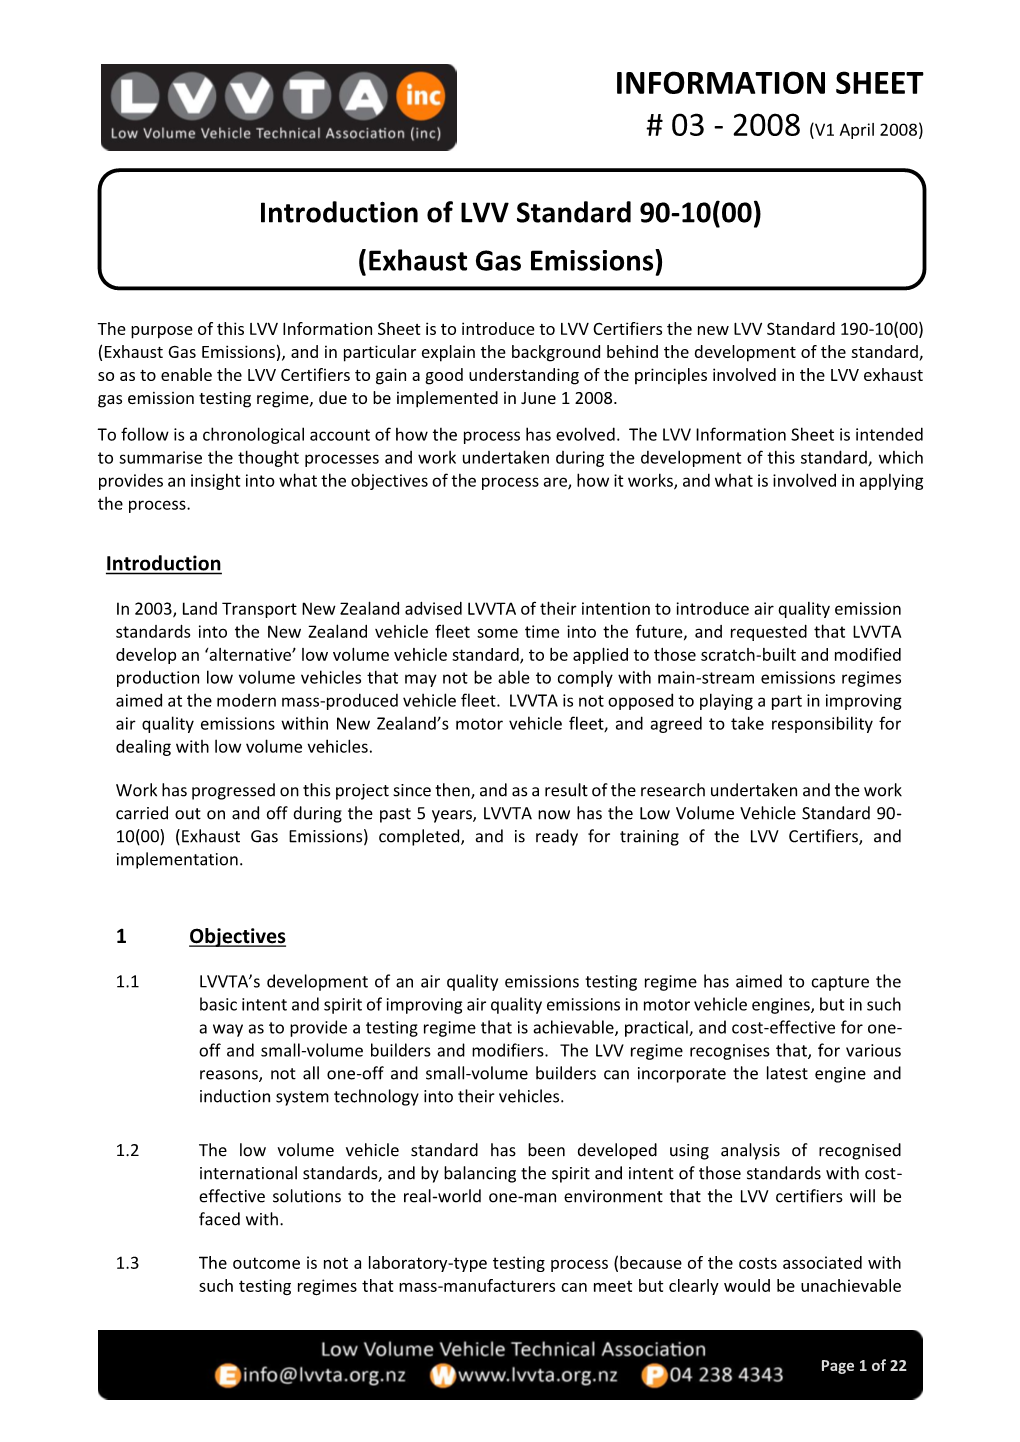 Introduction of LVV Standard 90-10(00) (Exhaust Gas Emissions)